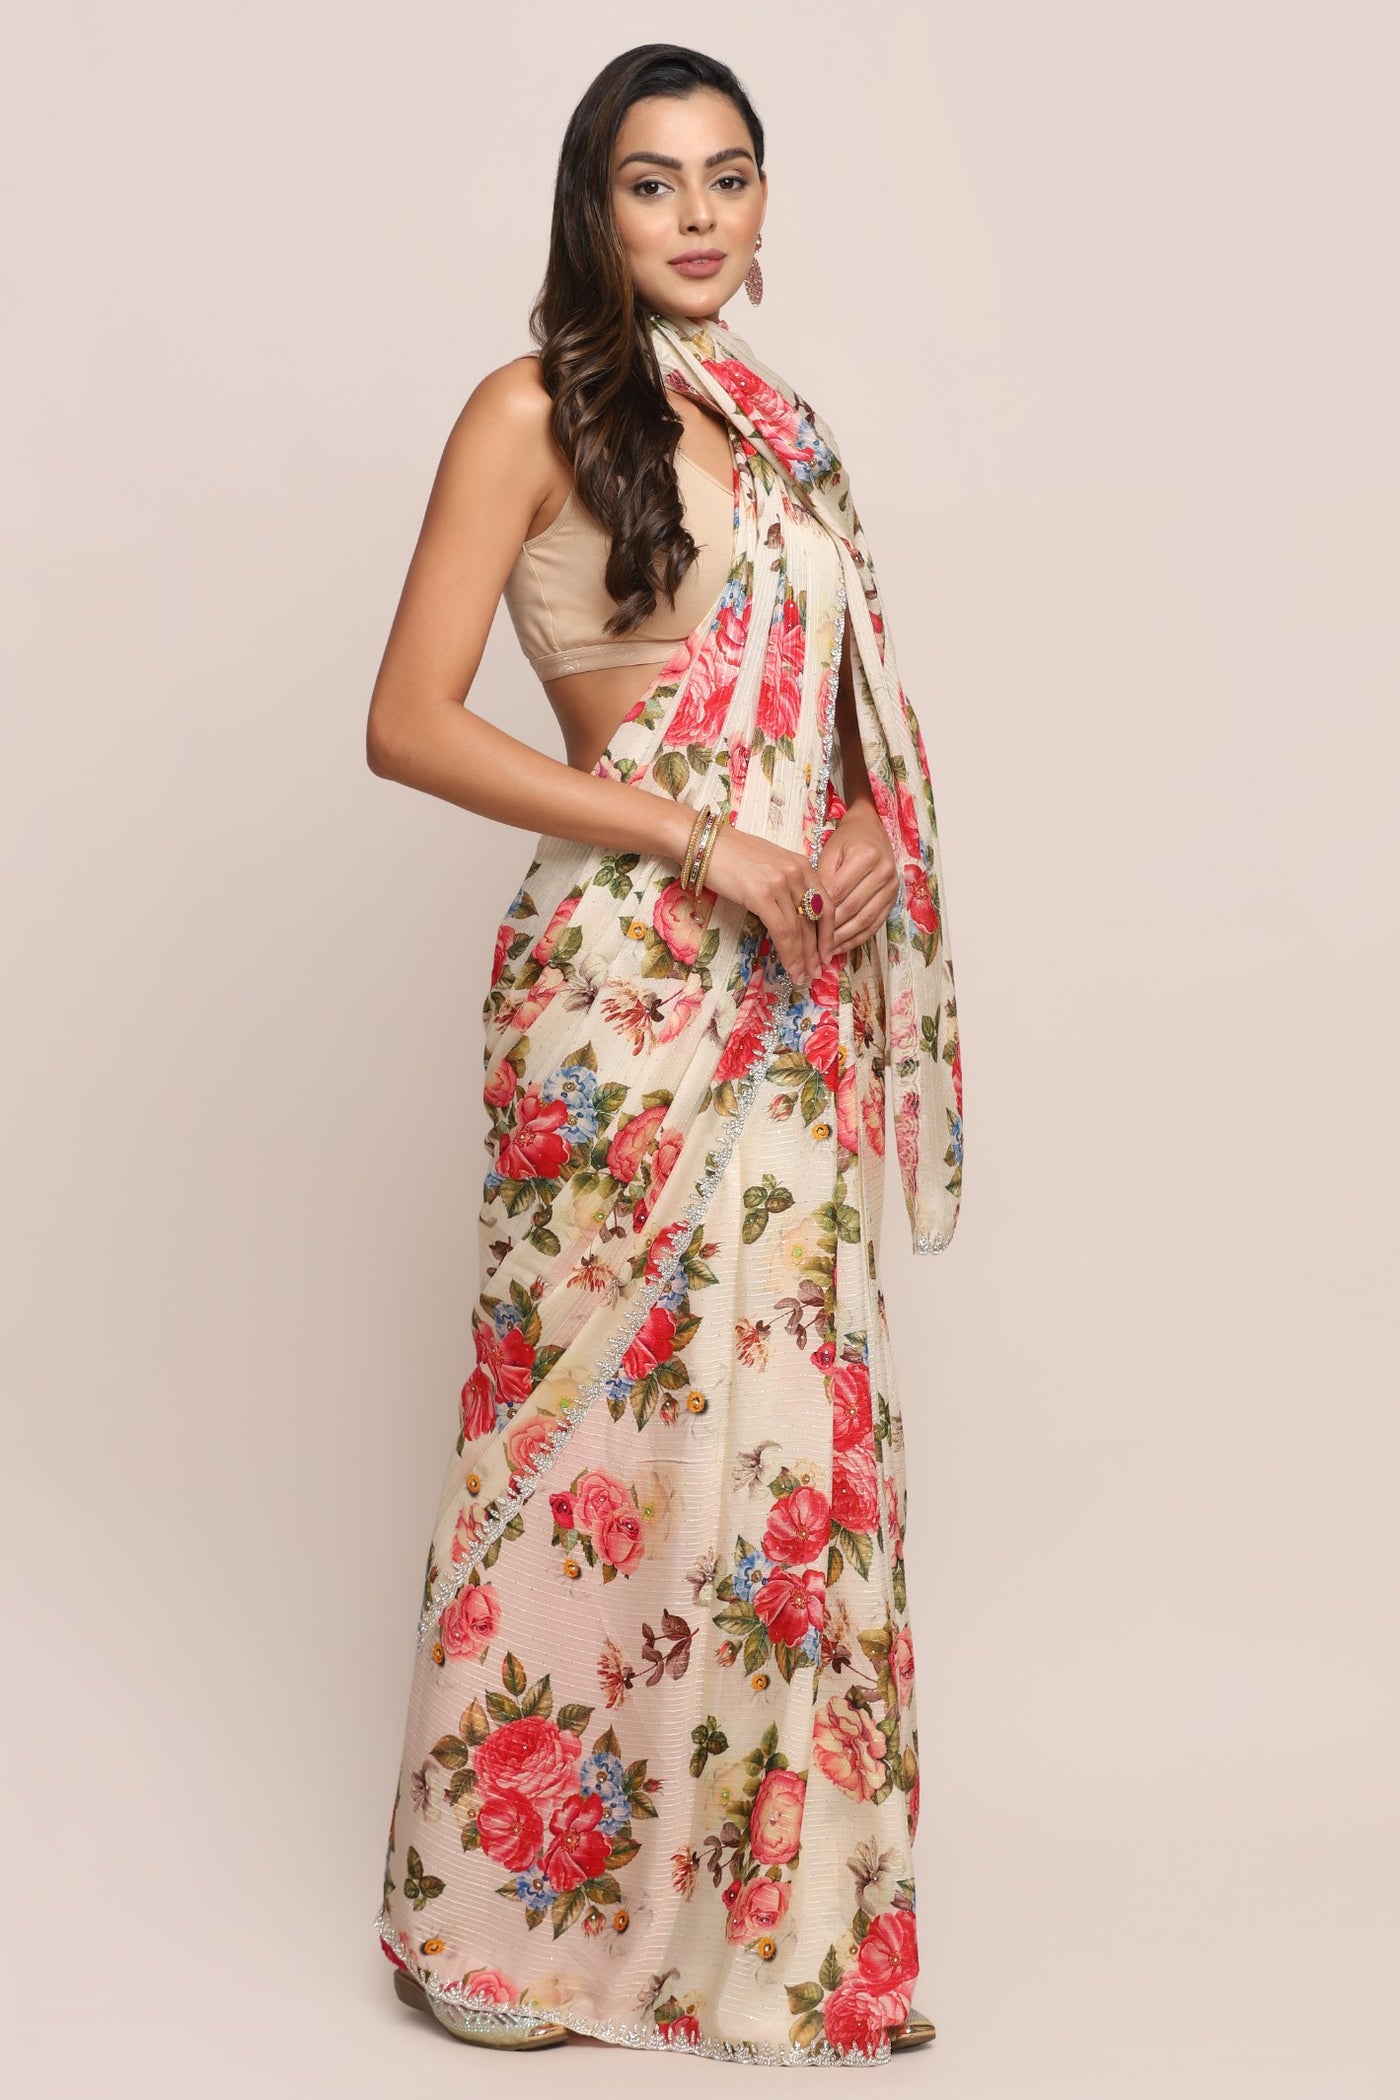 Stylish off white color floral motif embroidered saree